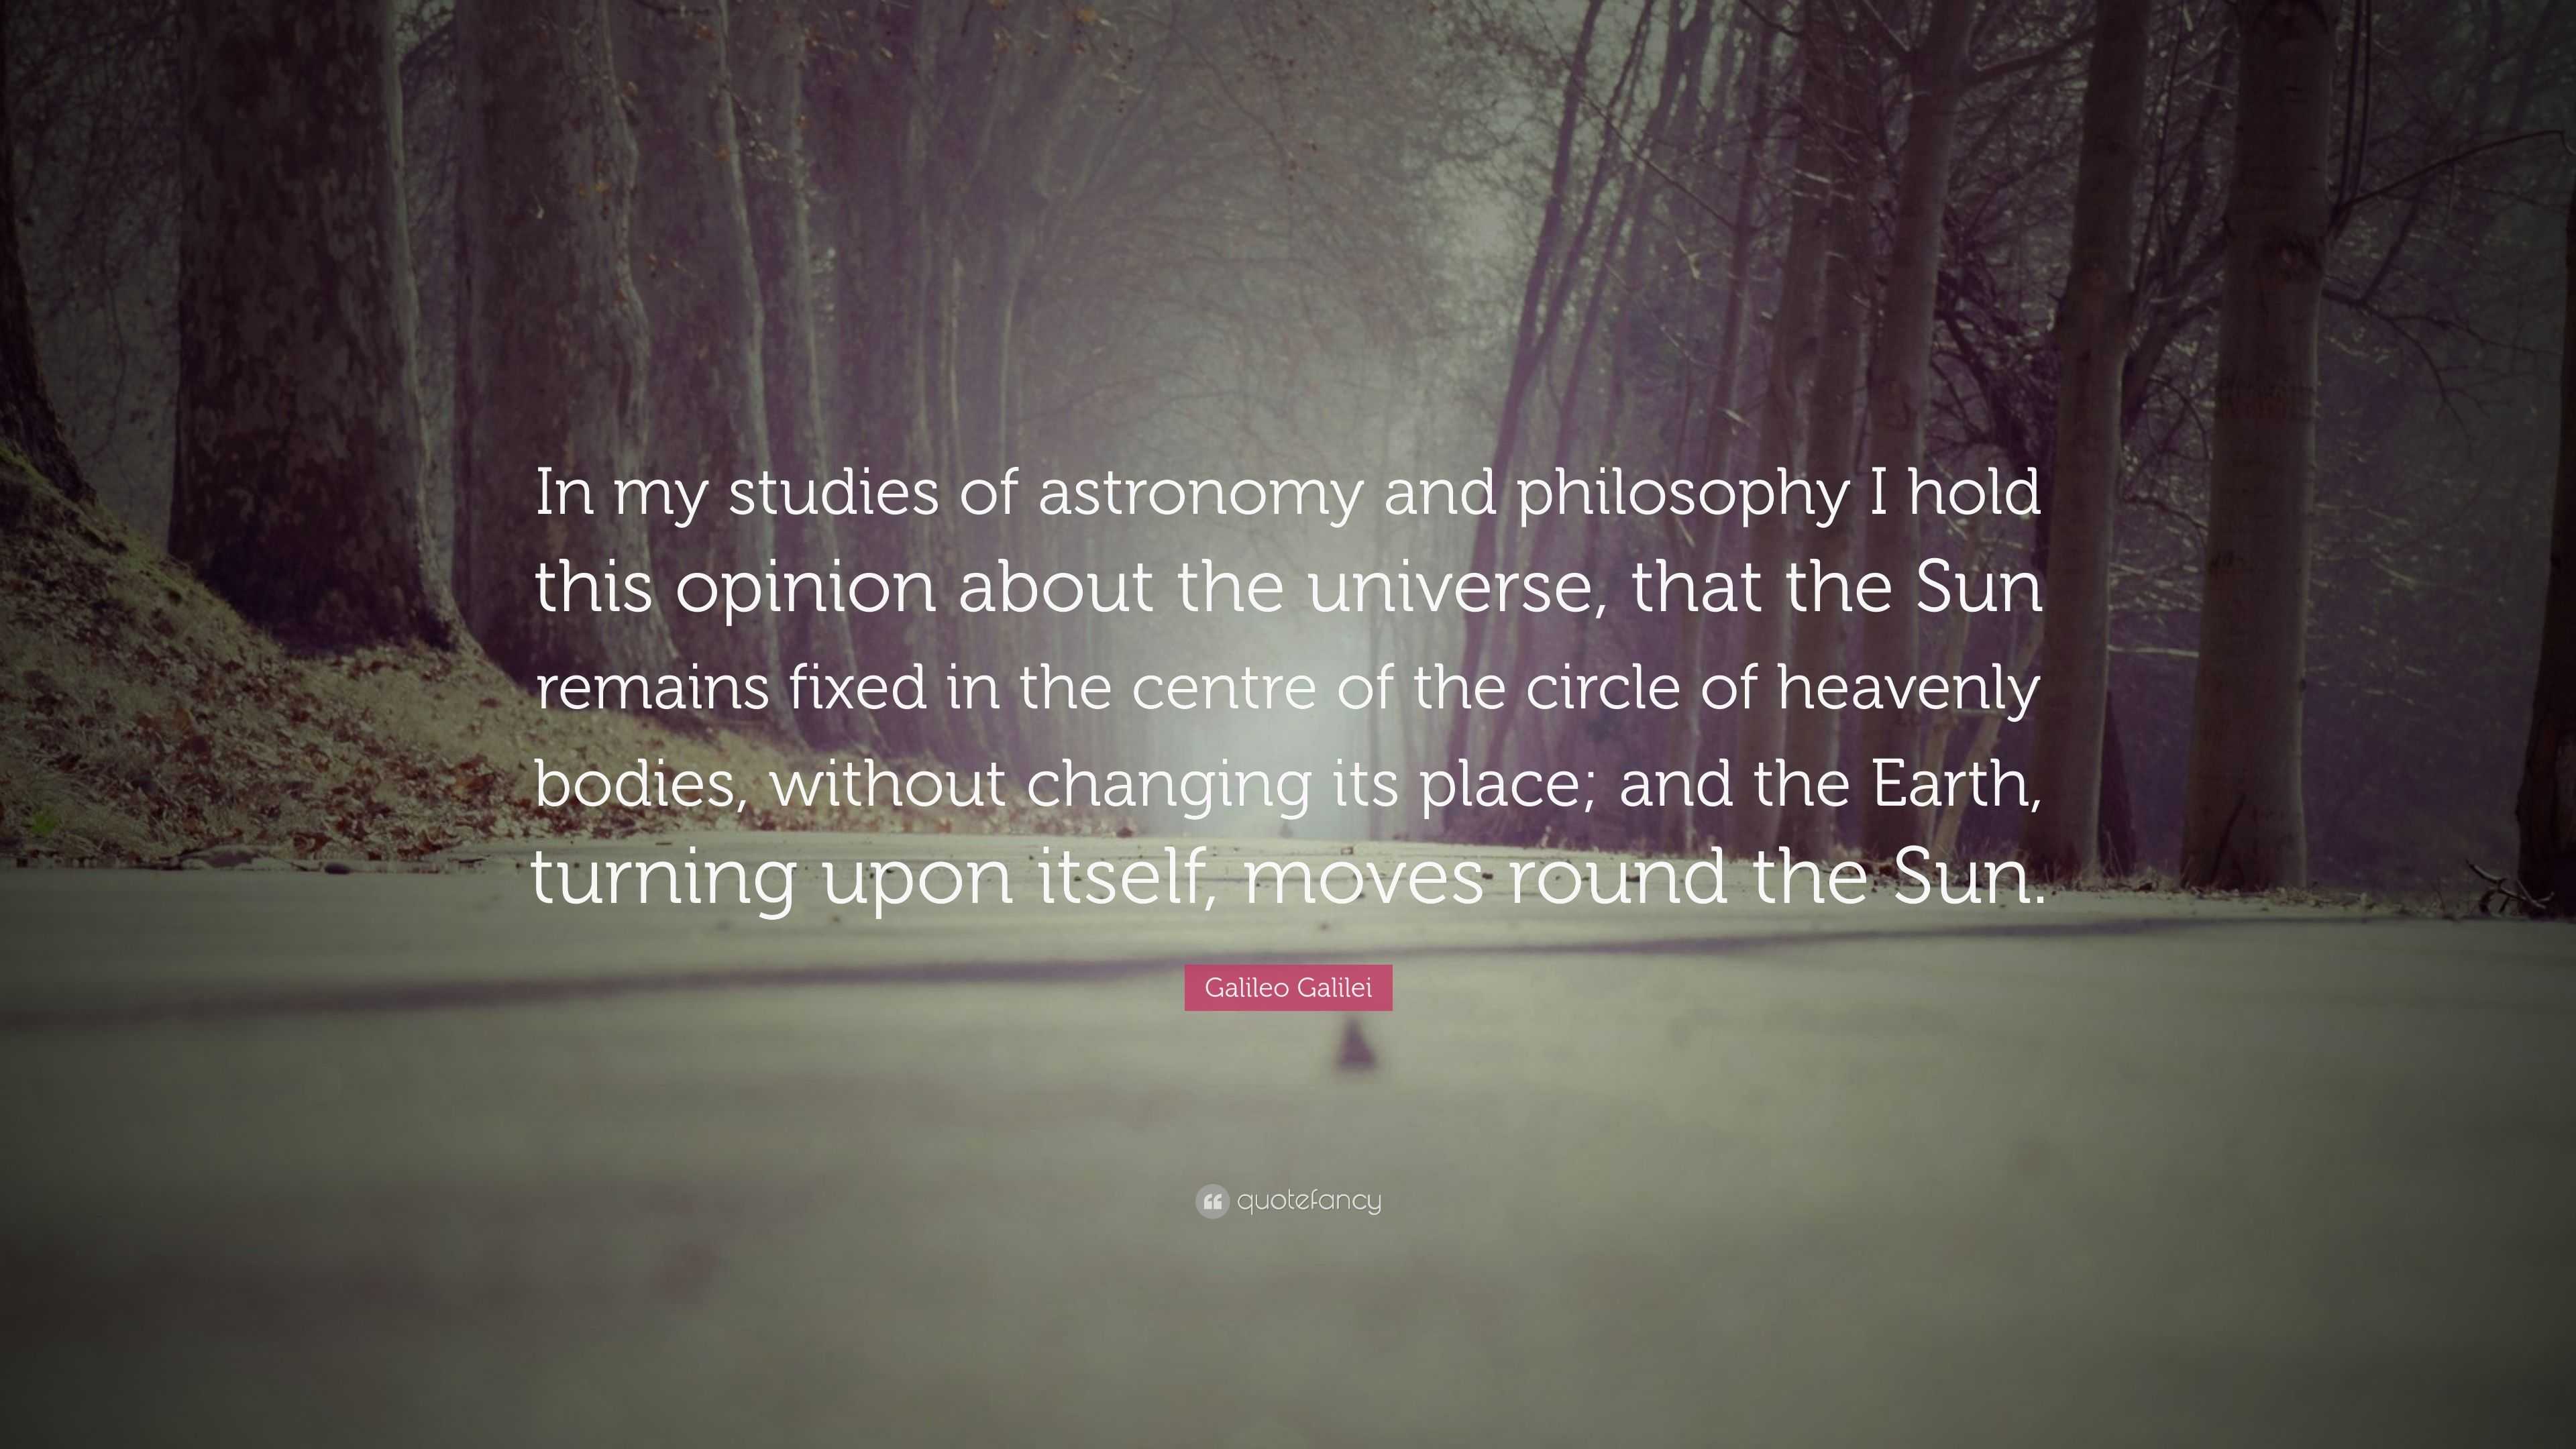 quotes by galileo galilei astronomy